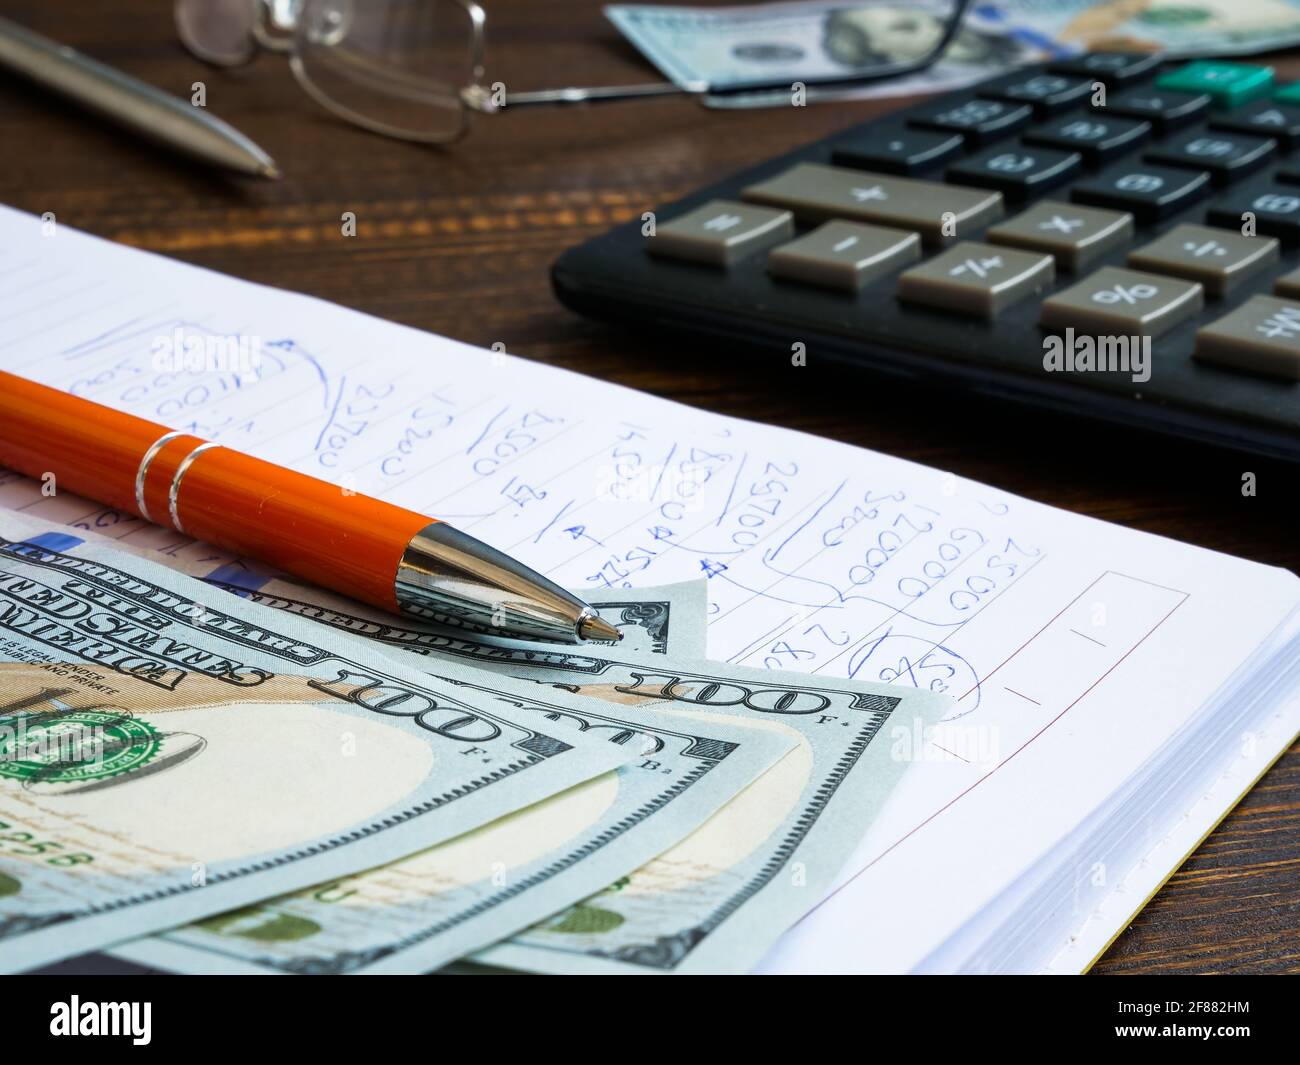 Financial calculations written by hand in a notebook, dollars and a calculator. Stock Photo